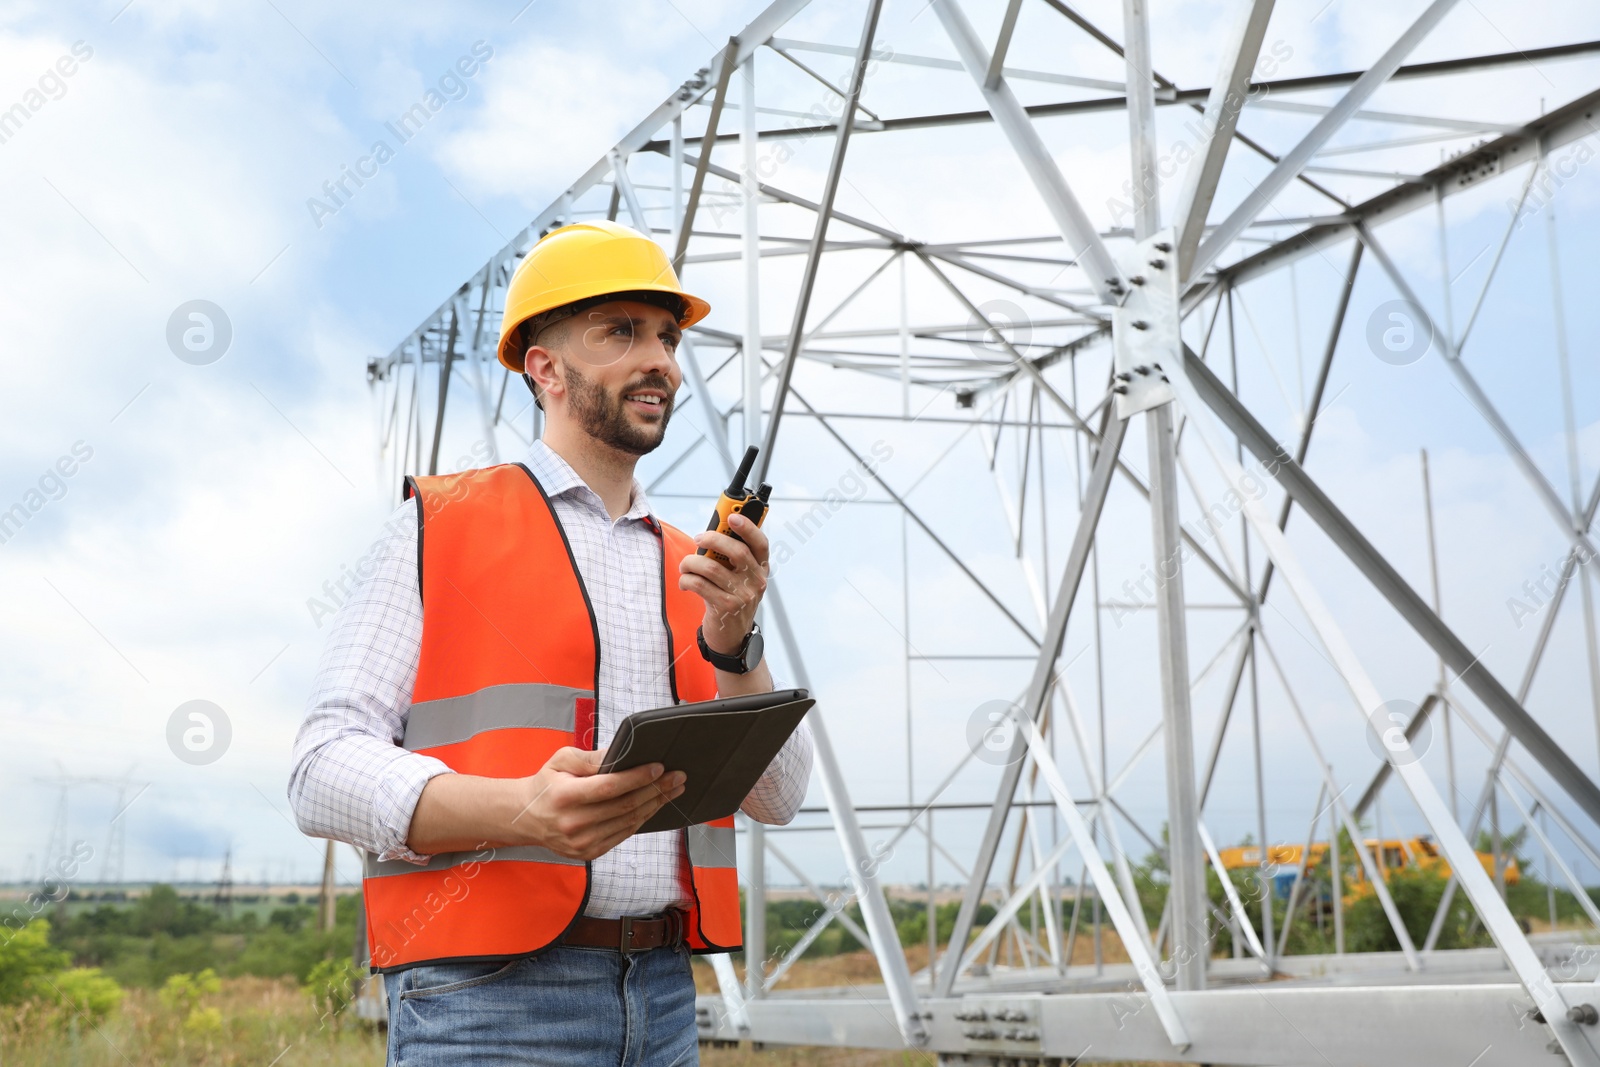 Photo of Professional engineer with tablet and walkie talkie near high voltage tower construction outdoors. Installation of electrical substation